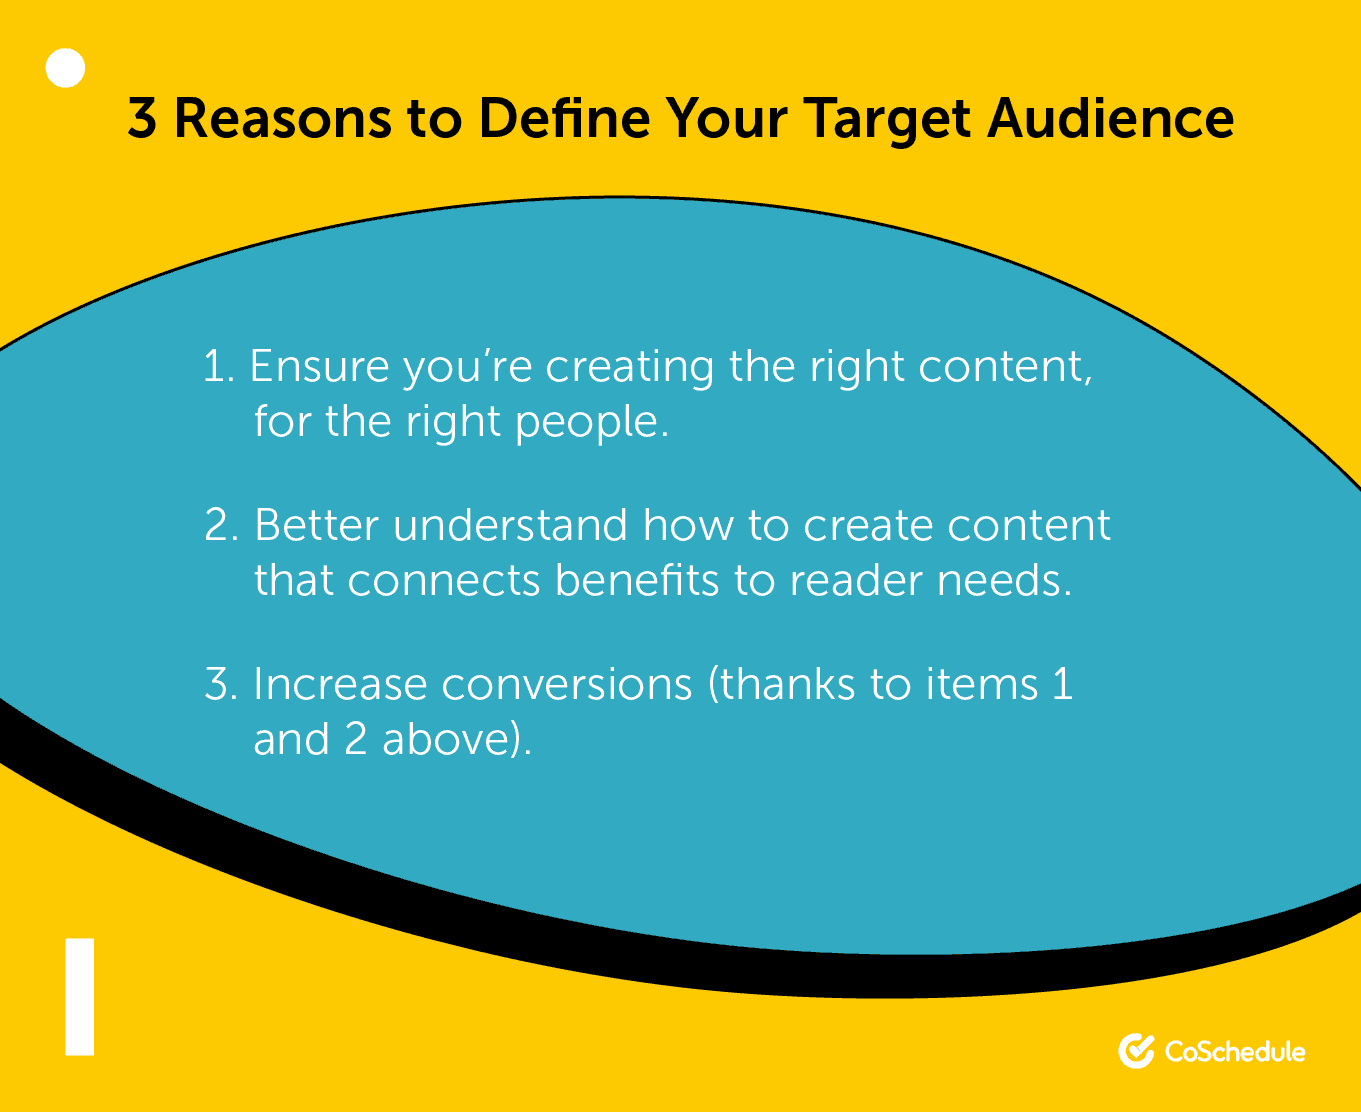 3 reasons to define your target audience